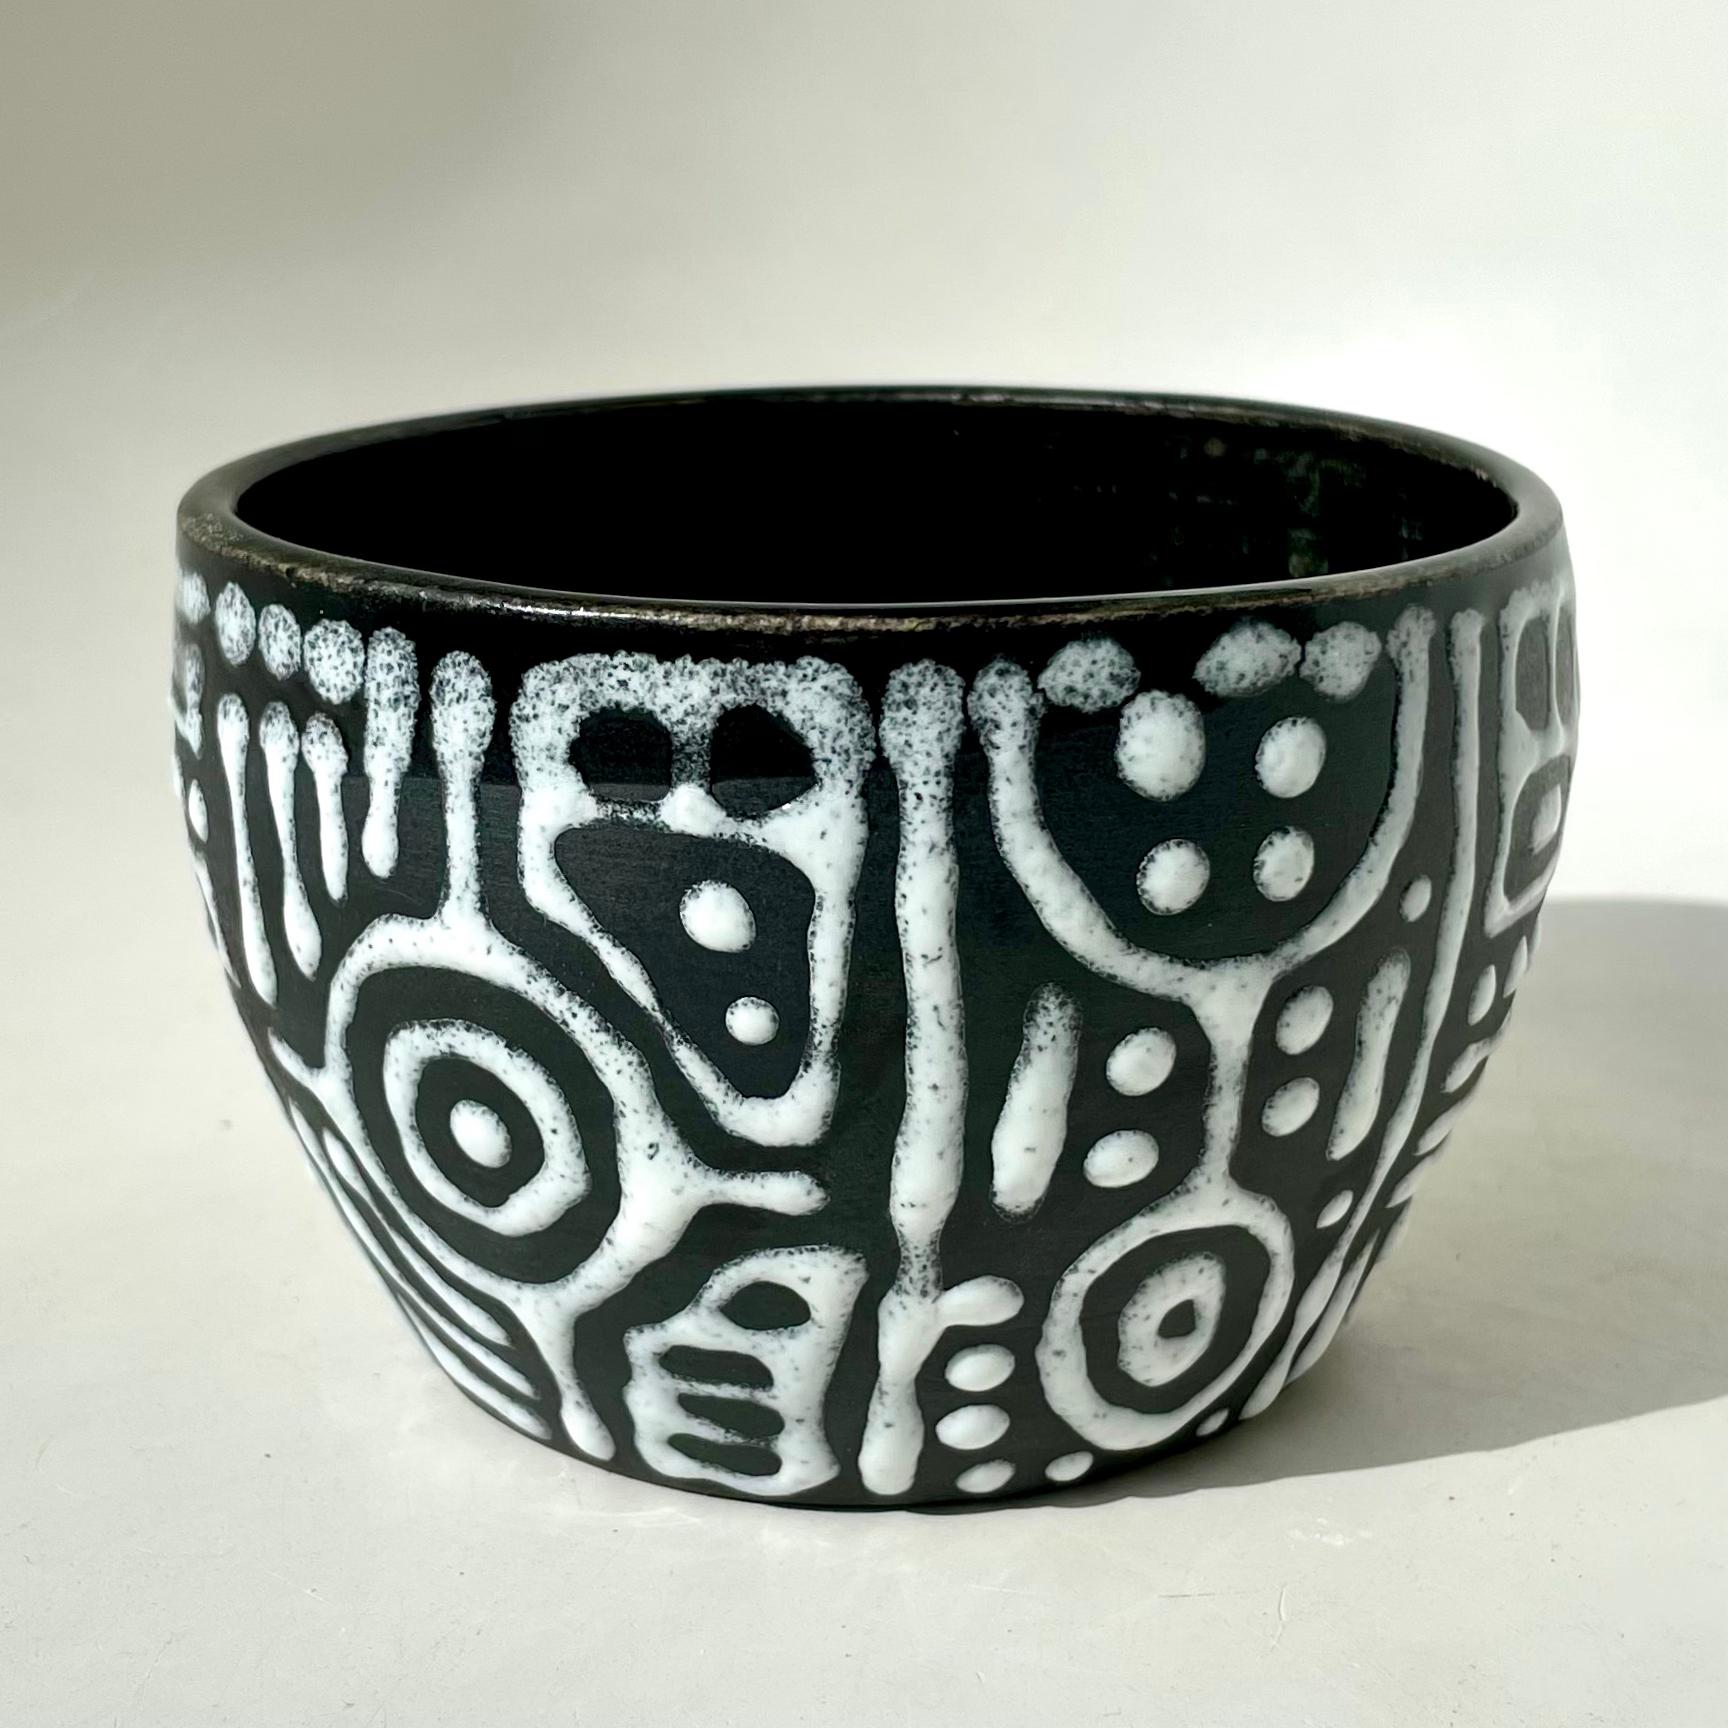 Modern La Mola Tumbler, Handmade and Food Safe, by Artist Stef Duffy For Sale